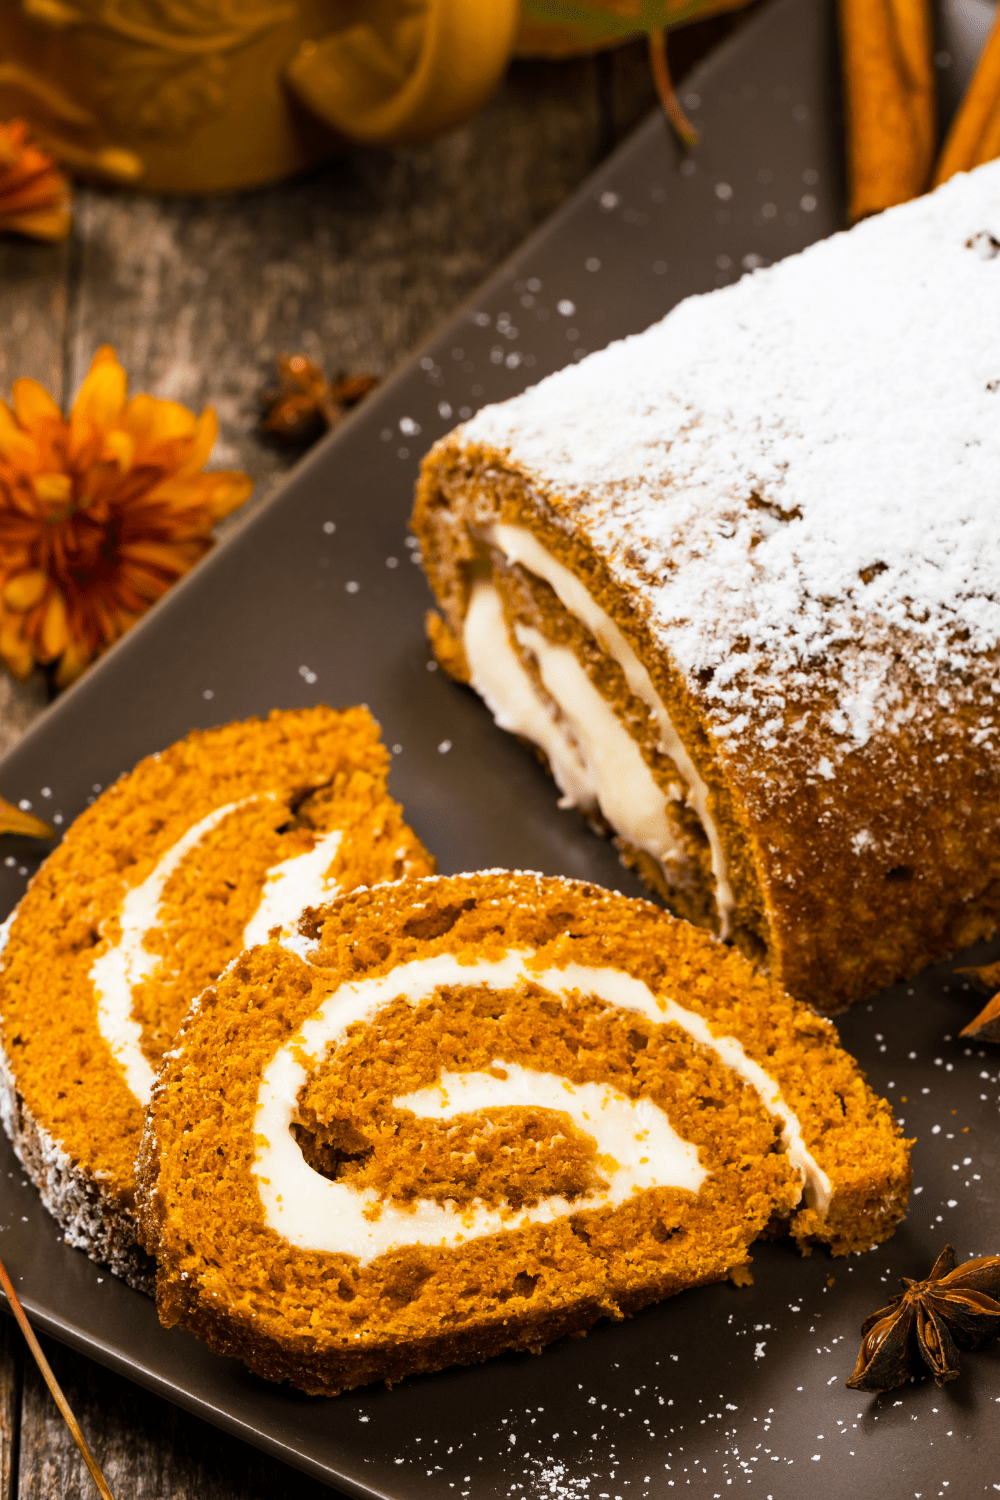 Homemade Pumpkin Roll on plastic tray with star anise on the side